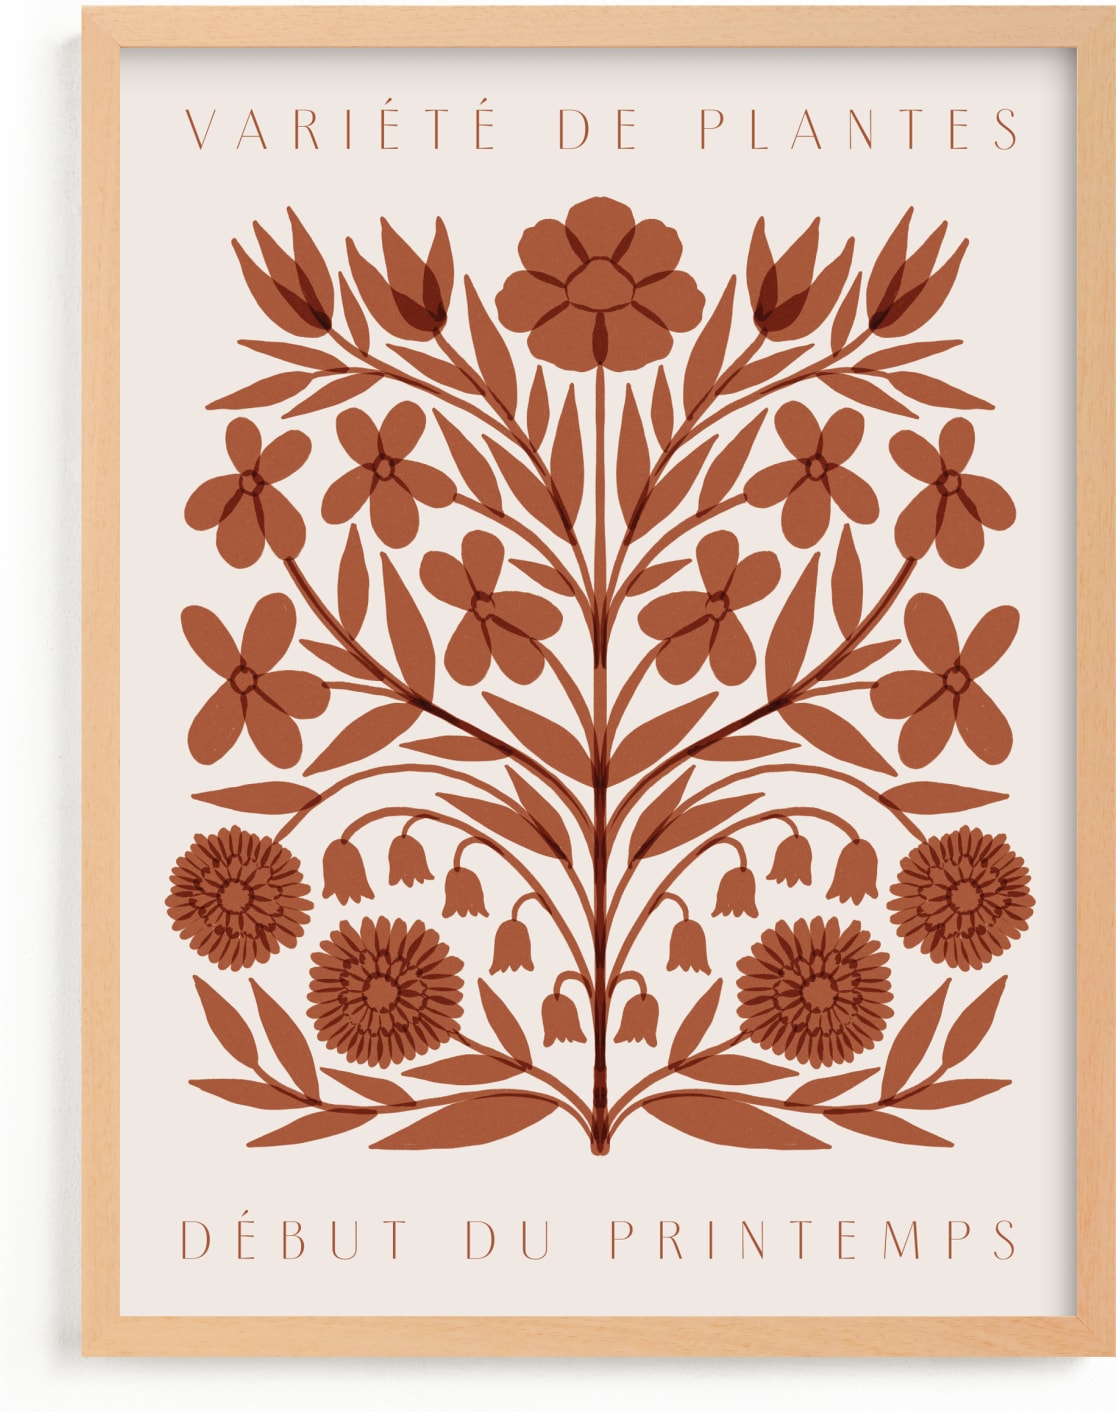 This is a brown art by Katharine Watson called Les Plantes I.